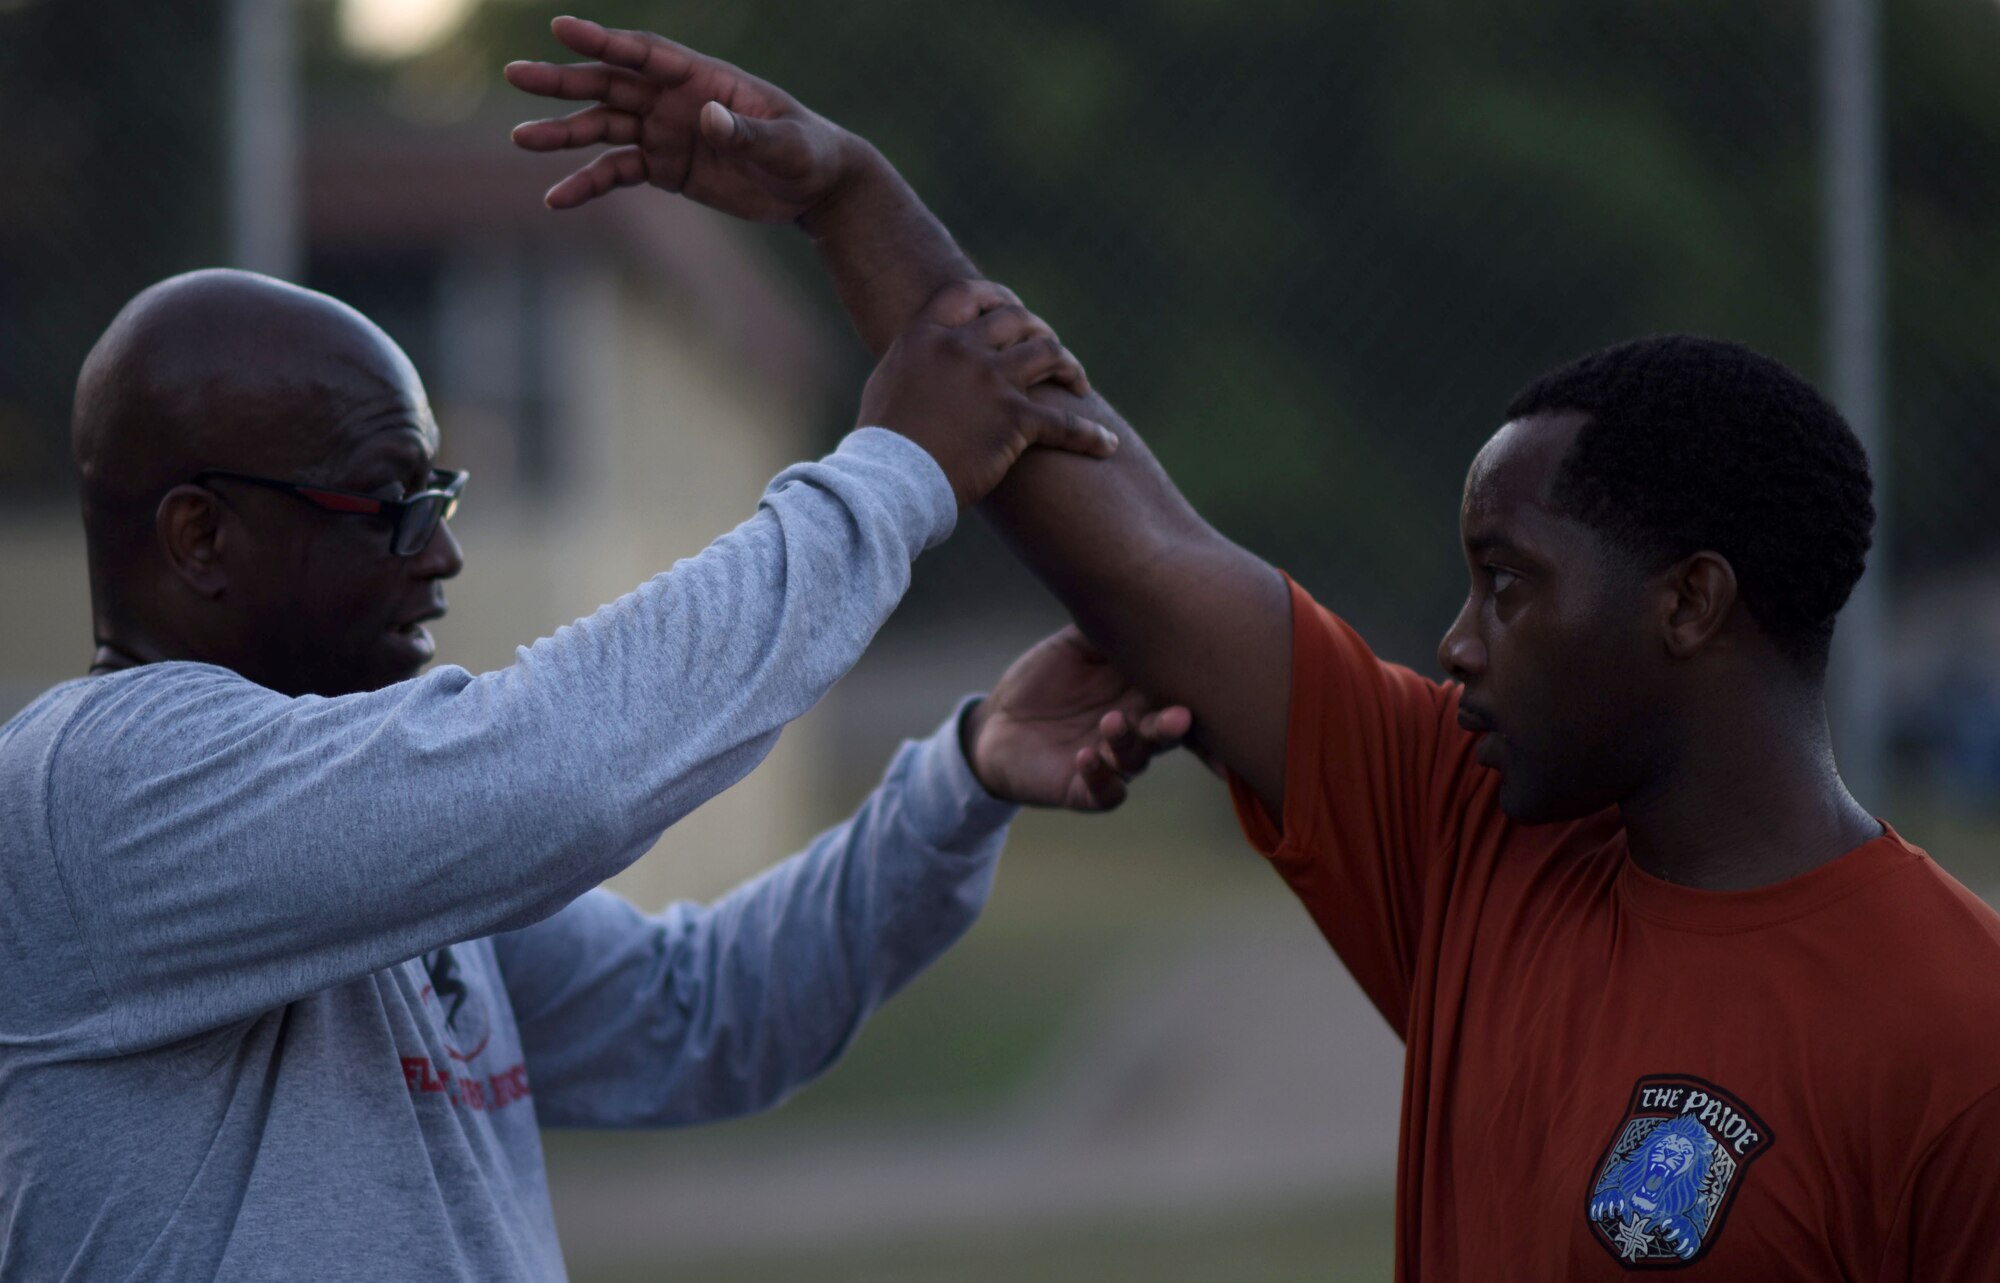 Retired Master Sgt. “E”, helps Airman 1st Class Daryl Parker, 608th Air Operations Center offensive duty technician, perfect his shooting form at Barksdale Air Force Base, La., Oct. 12, 2016. With support from his leadership, Parker was selected to try out for the All-Air Force Men’s Basketball Team. (U.S. Air Force photo/Senior Airman Damon Kasberg)